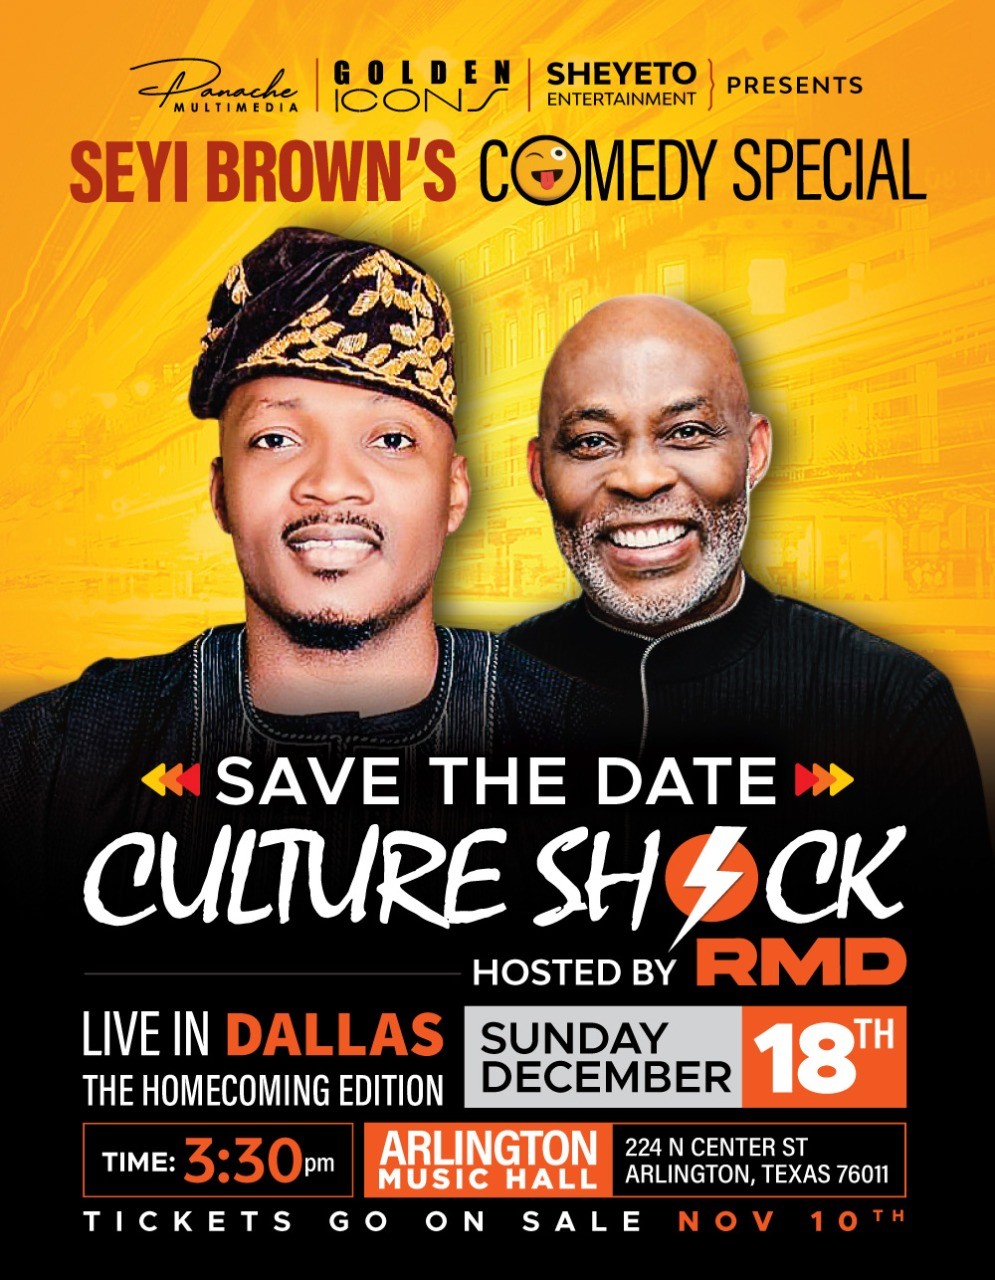 Culture Shock presents Seyi Brown's Comedy Special*